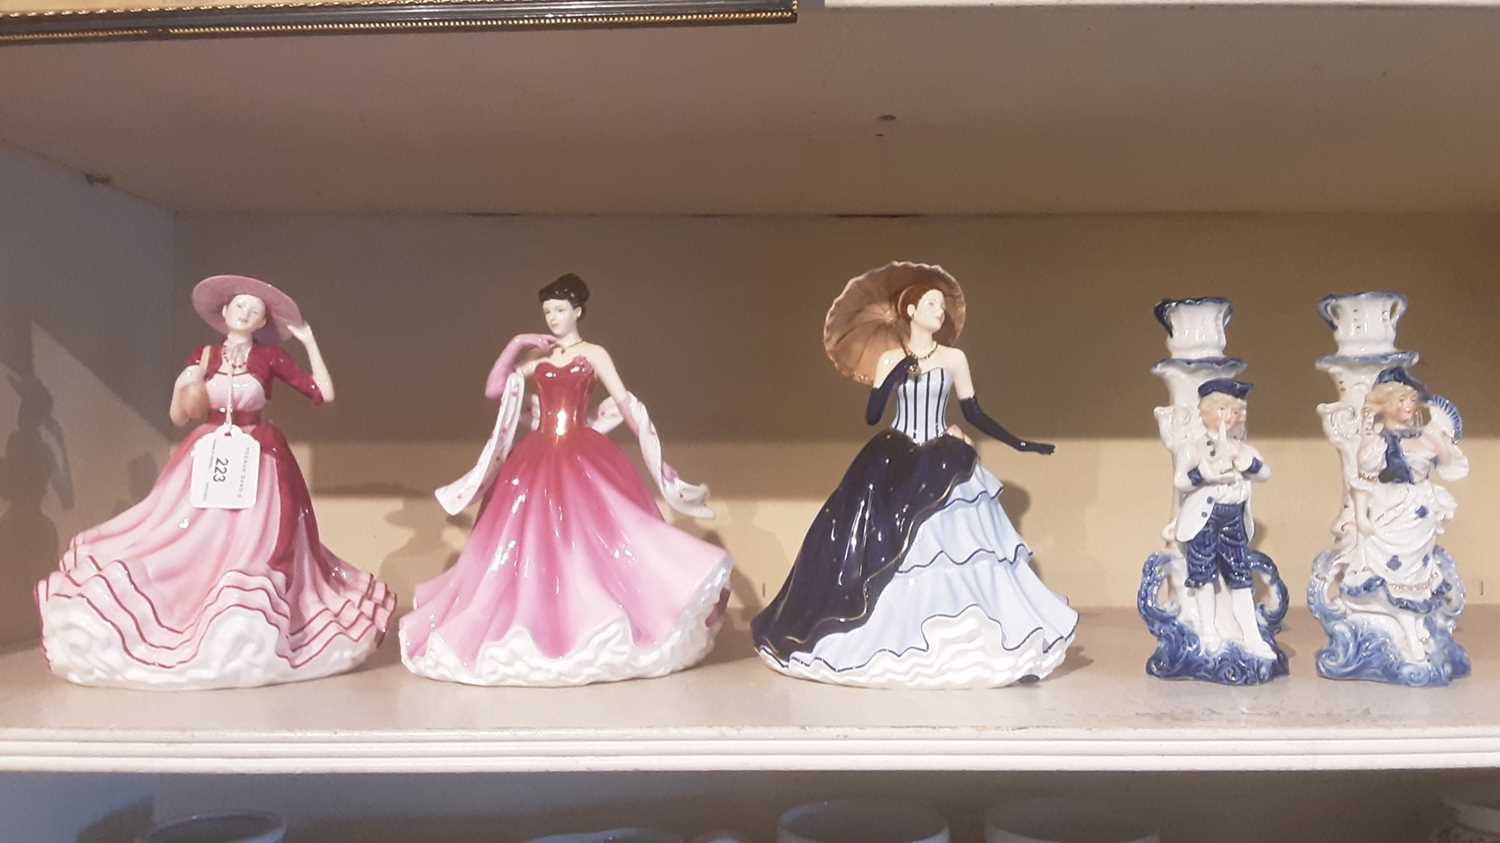 Lot 223 - Three Royal Doulton Pretty Ladies - Kate HN5527, Alexandra HN5373 and Amy HN5515, together with a pair of old blue and white porcelain spill vases (5)